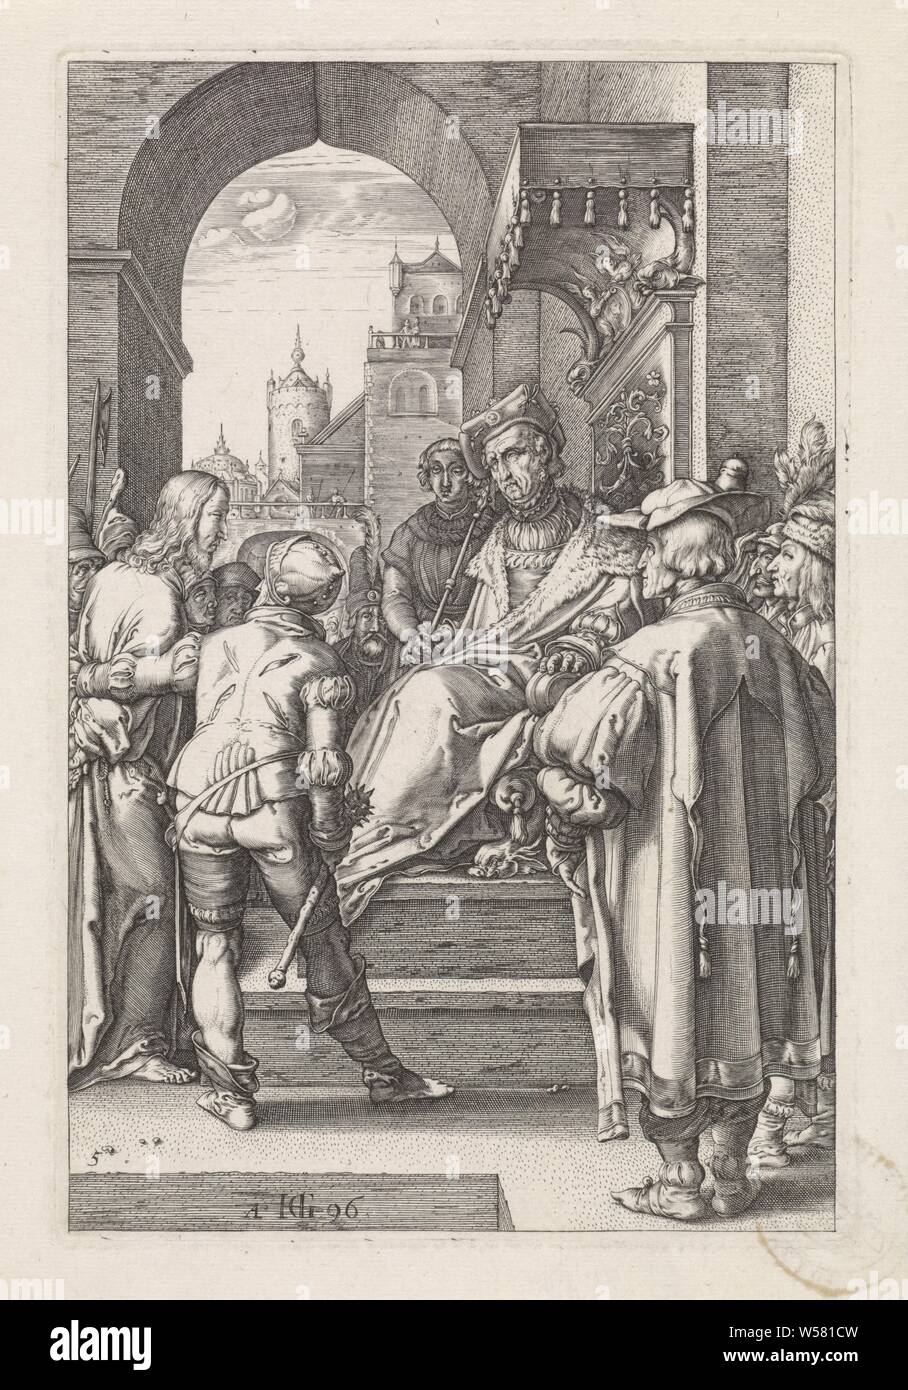 Christ for Pilate The Passion (series title), Christ is brought before Pilate, who sits on a throne., anonymous, Netherlands, 1596 and/or 1596 - 1667, paper, engraving, h 197 mm × w 133 mm Stock Photo